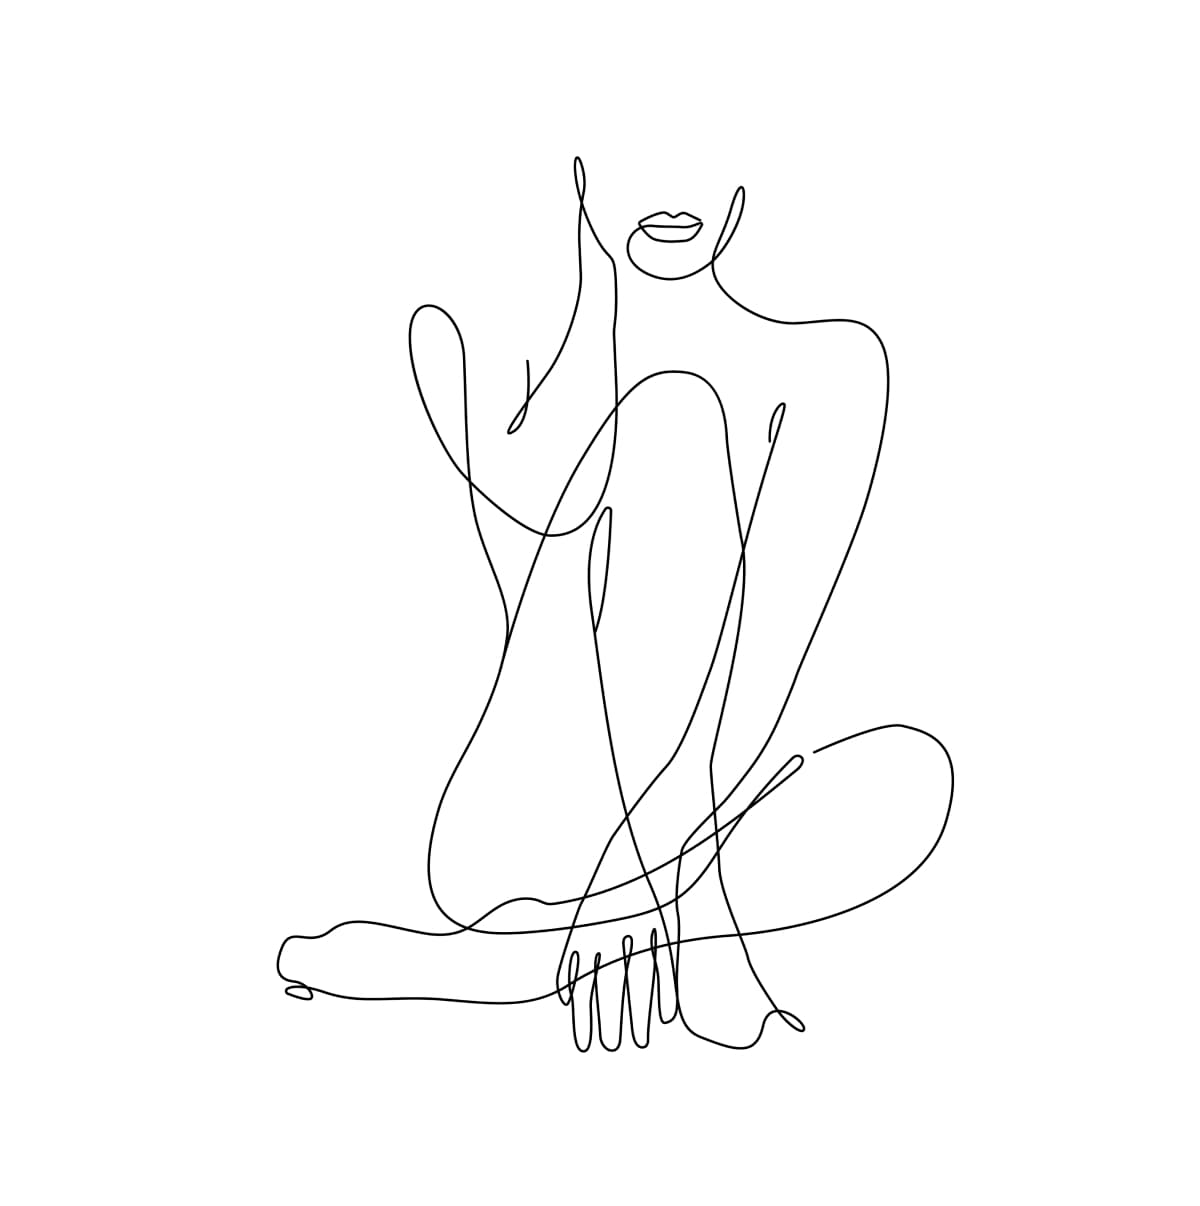 sketch of woman's body